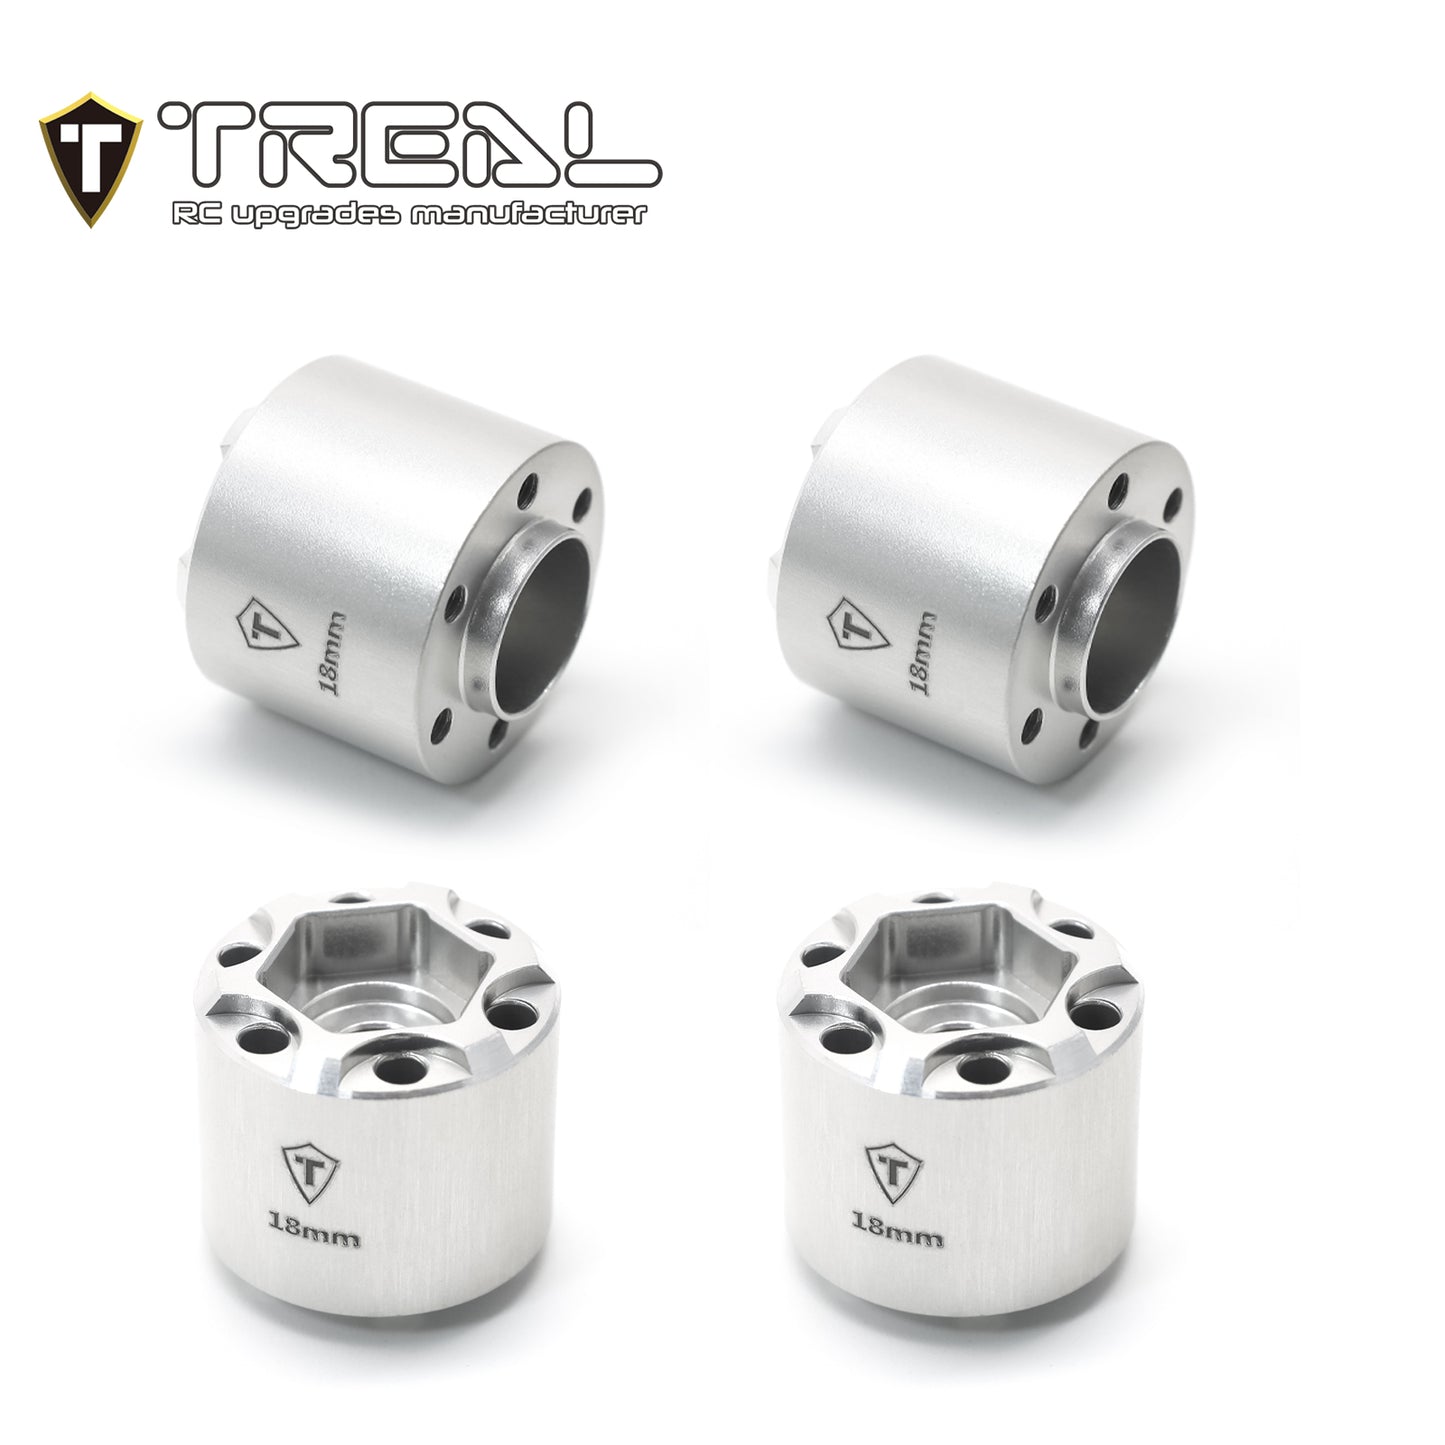 Treal 12mm Hex Hubs 1.9 Wheel Spacer Extension 12mm/15mm/18mm (4p)for 1/10 RC Crawler 1.9 inch Wheel Rim(Silver)